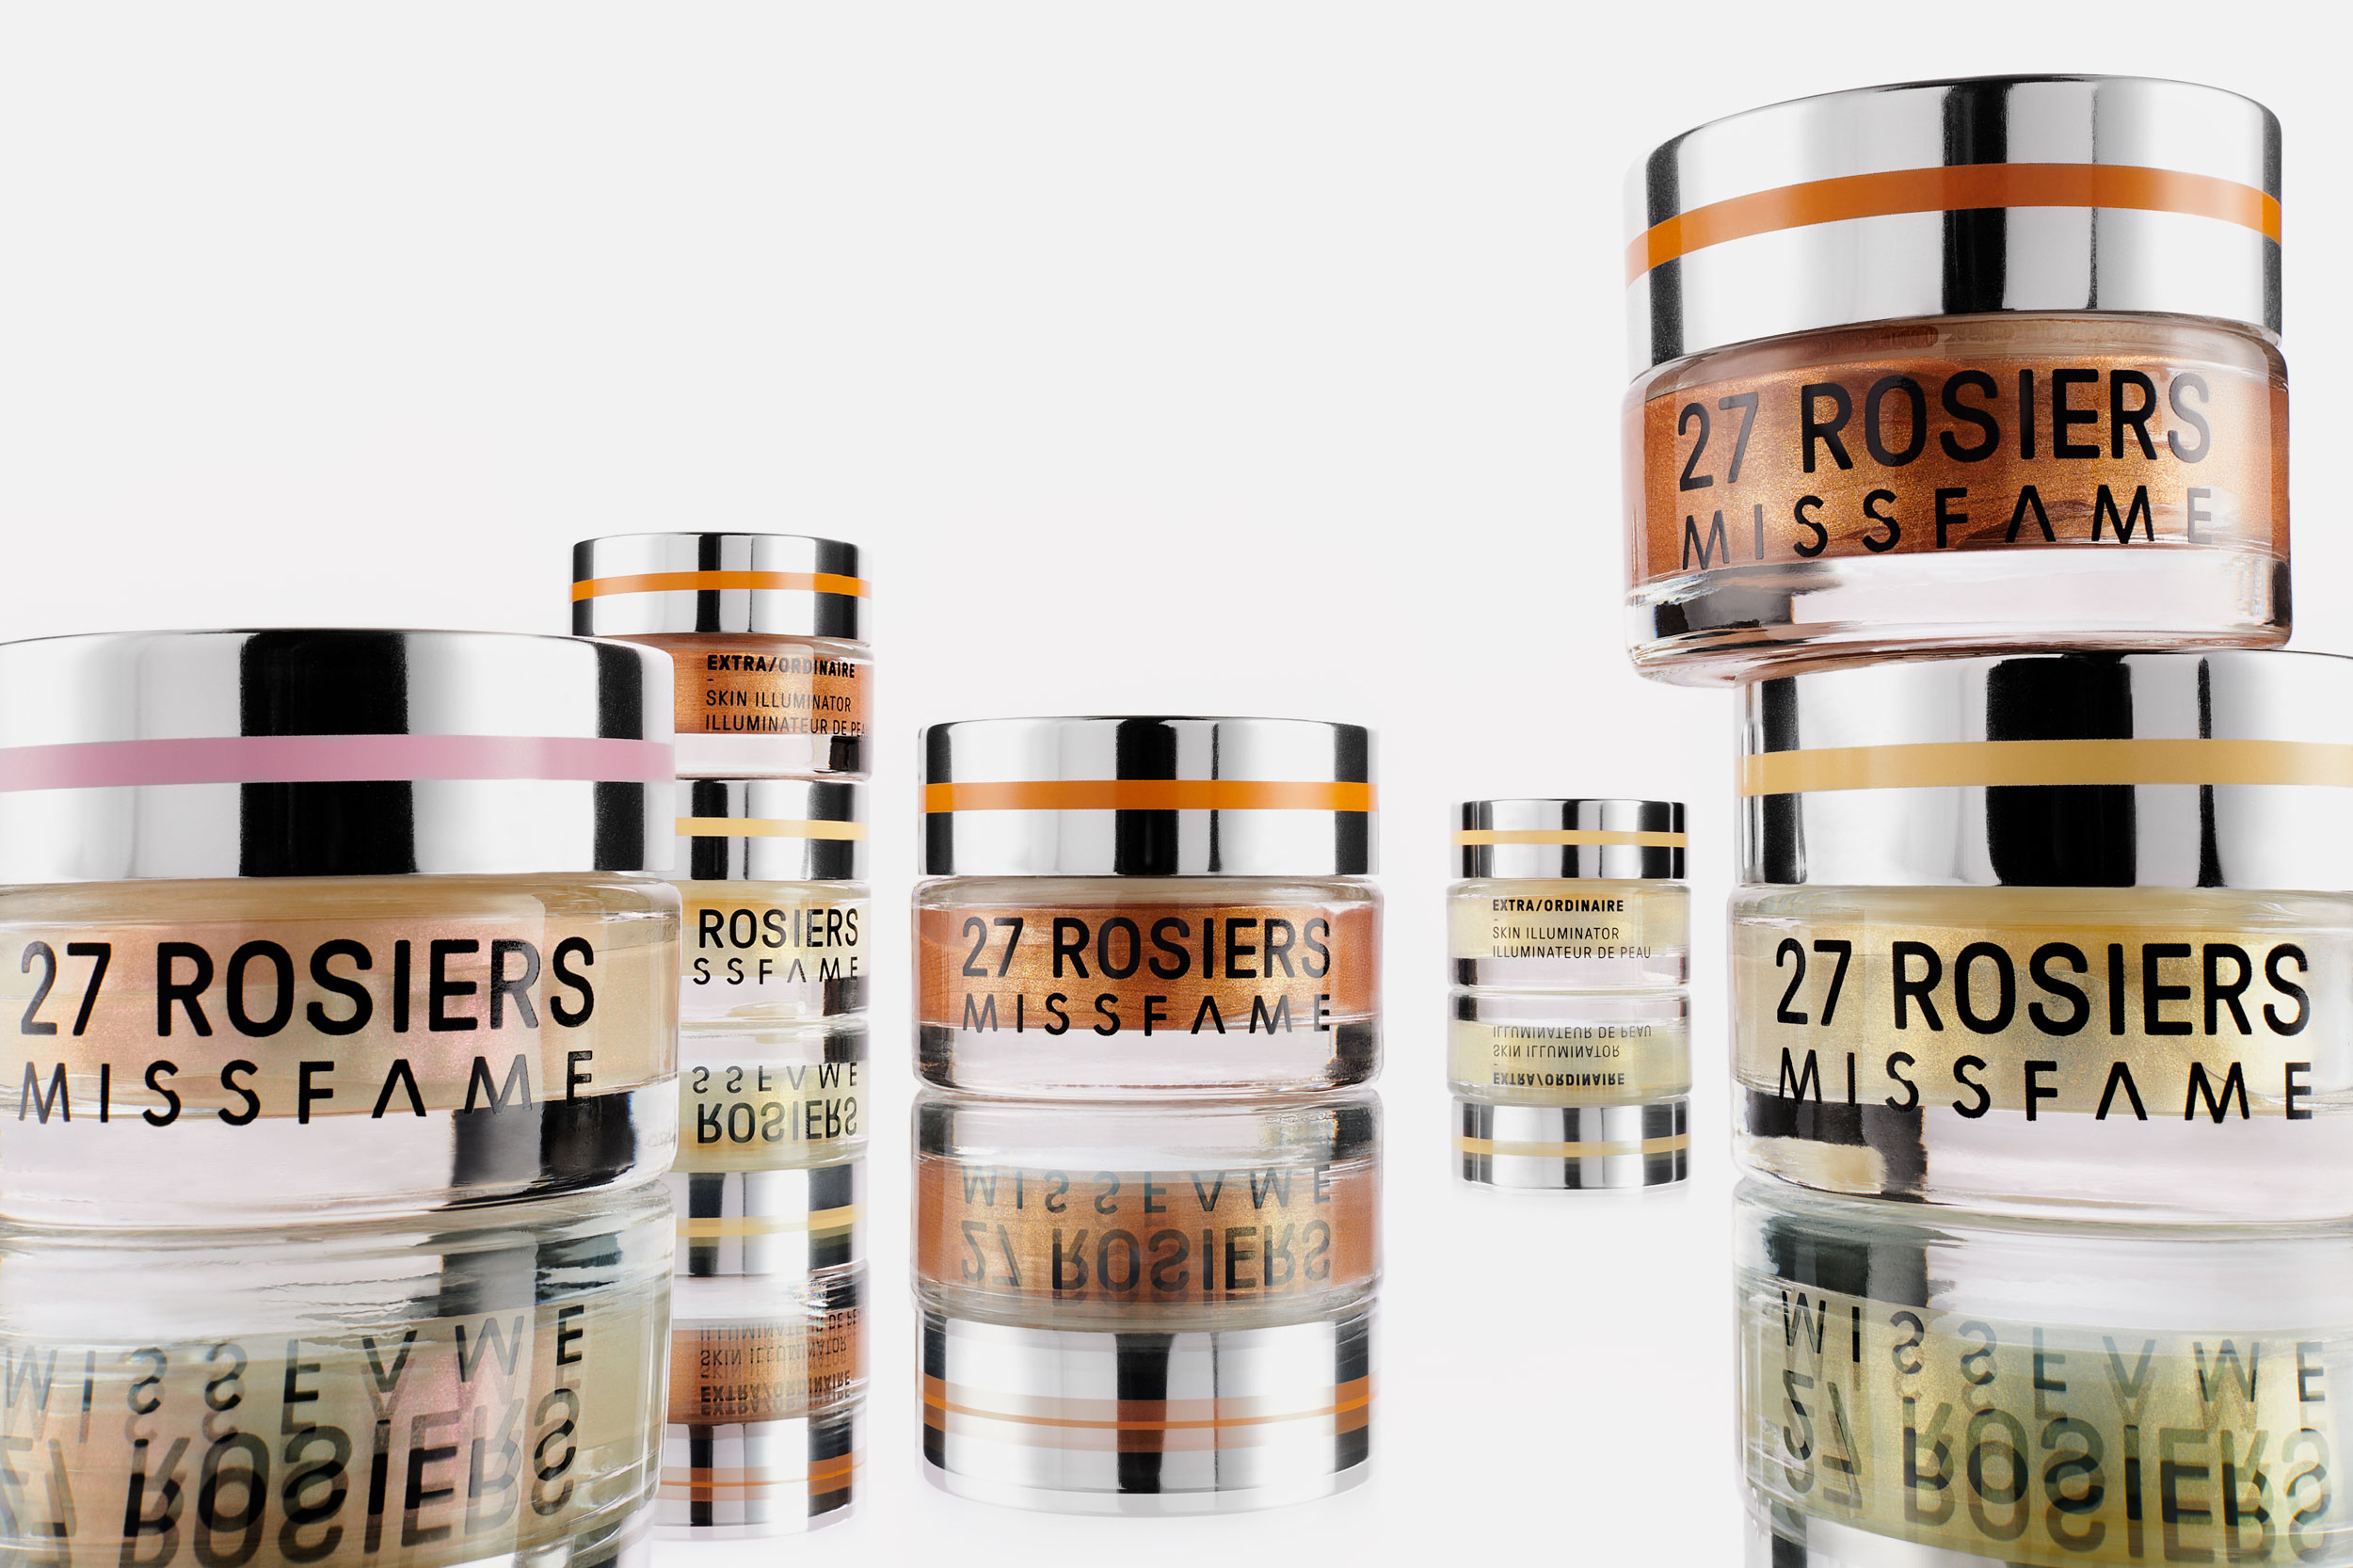 Cosmetics containers on mirrored surface